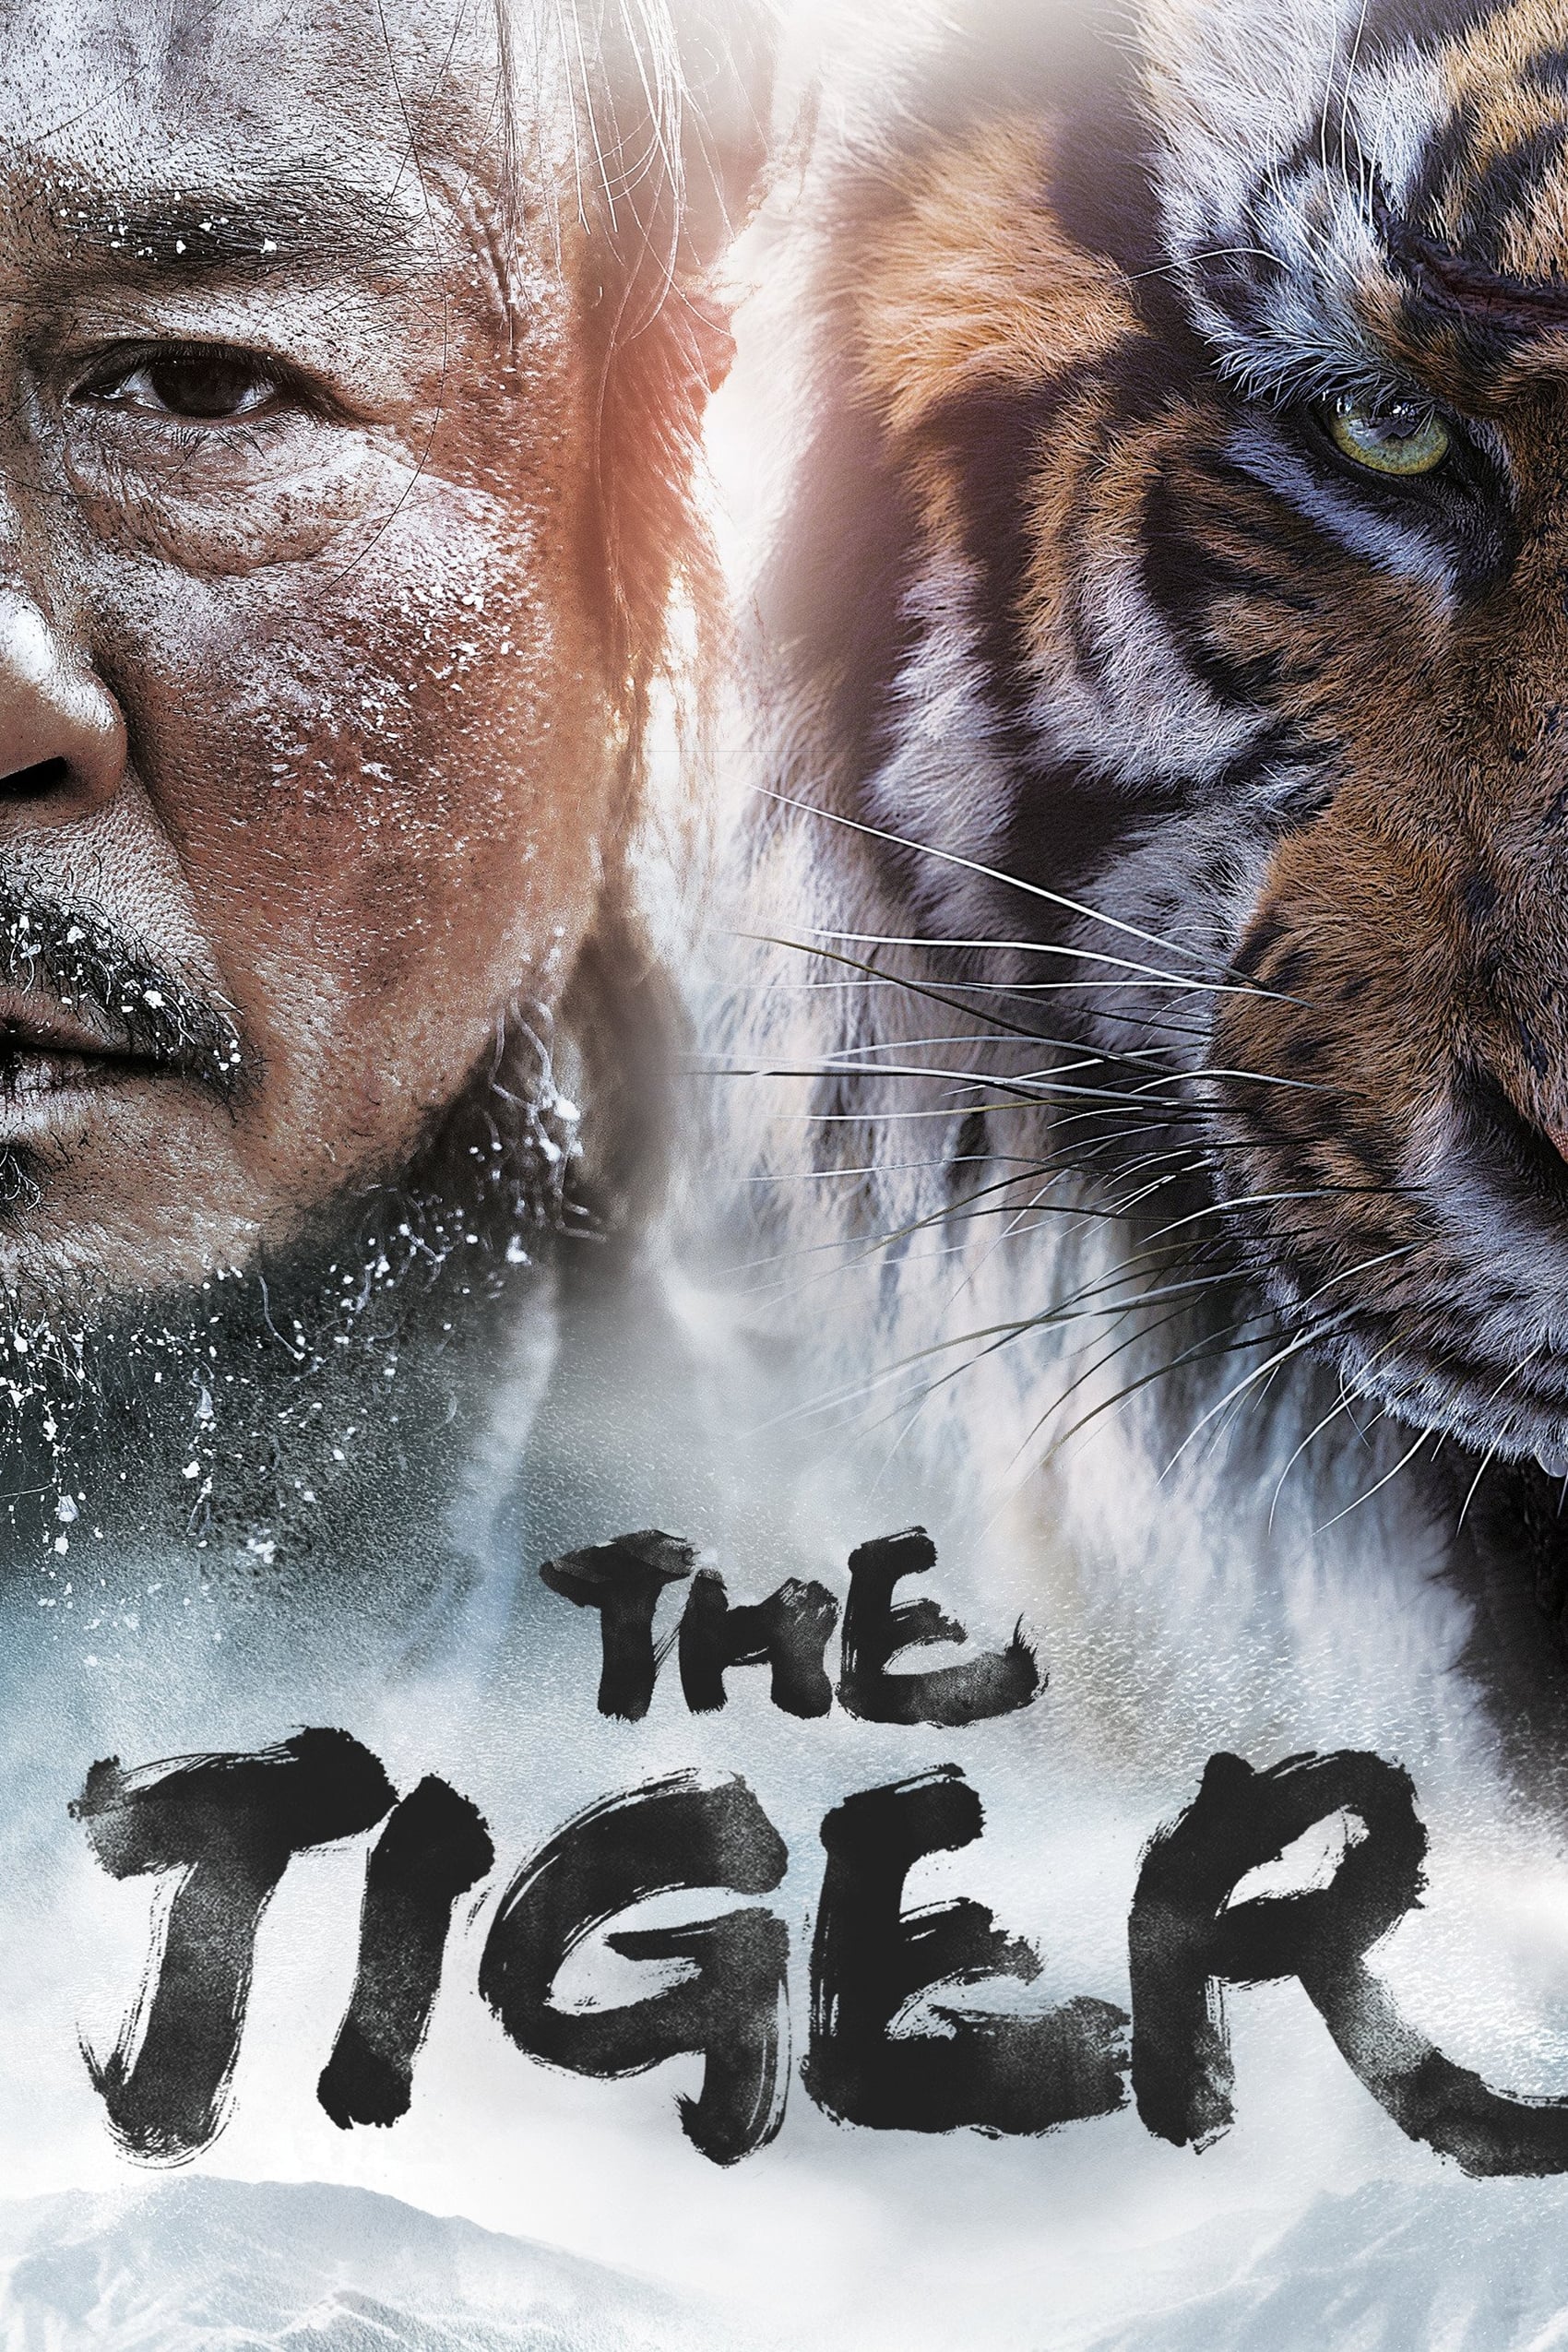 The Tiger: An Old Hunter's Tale (2015)